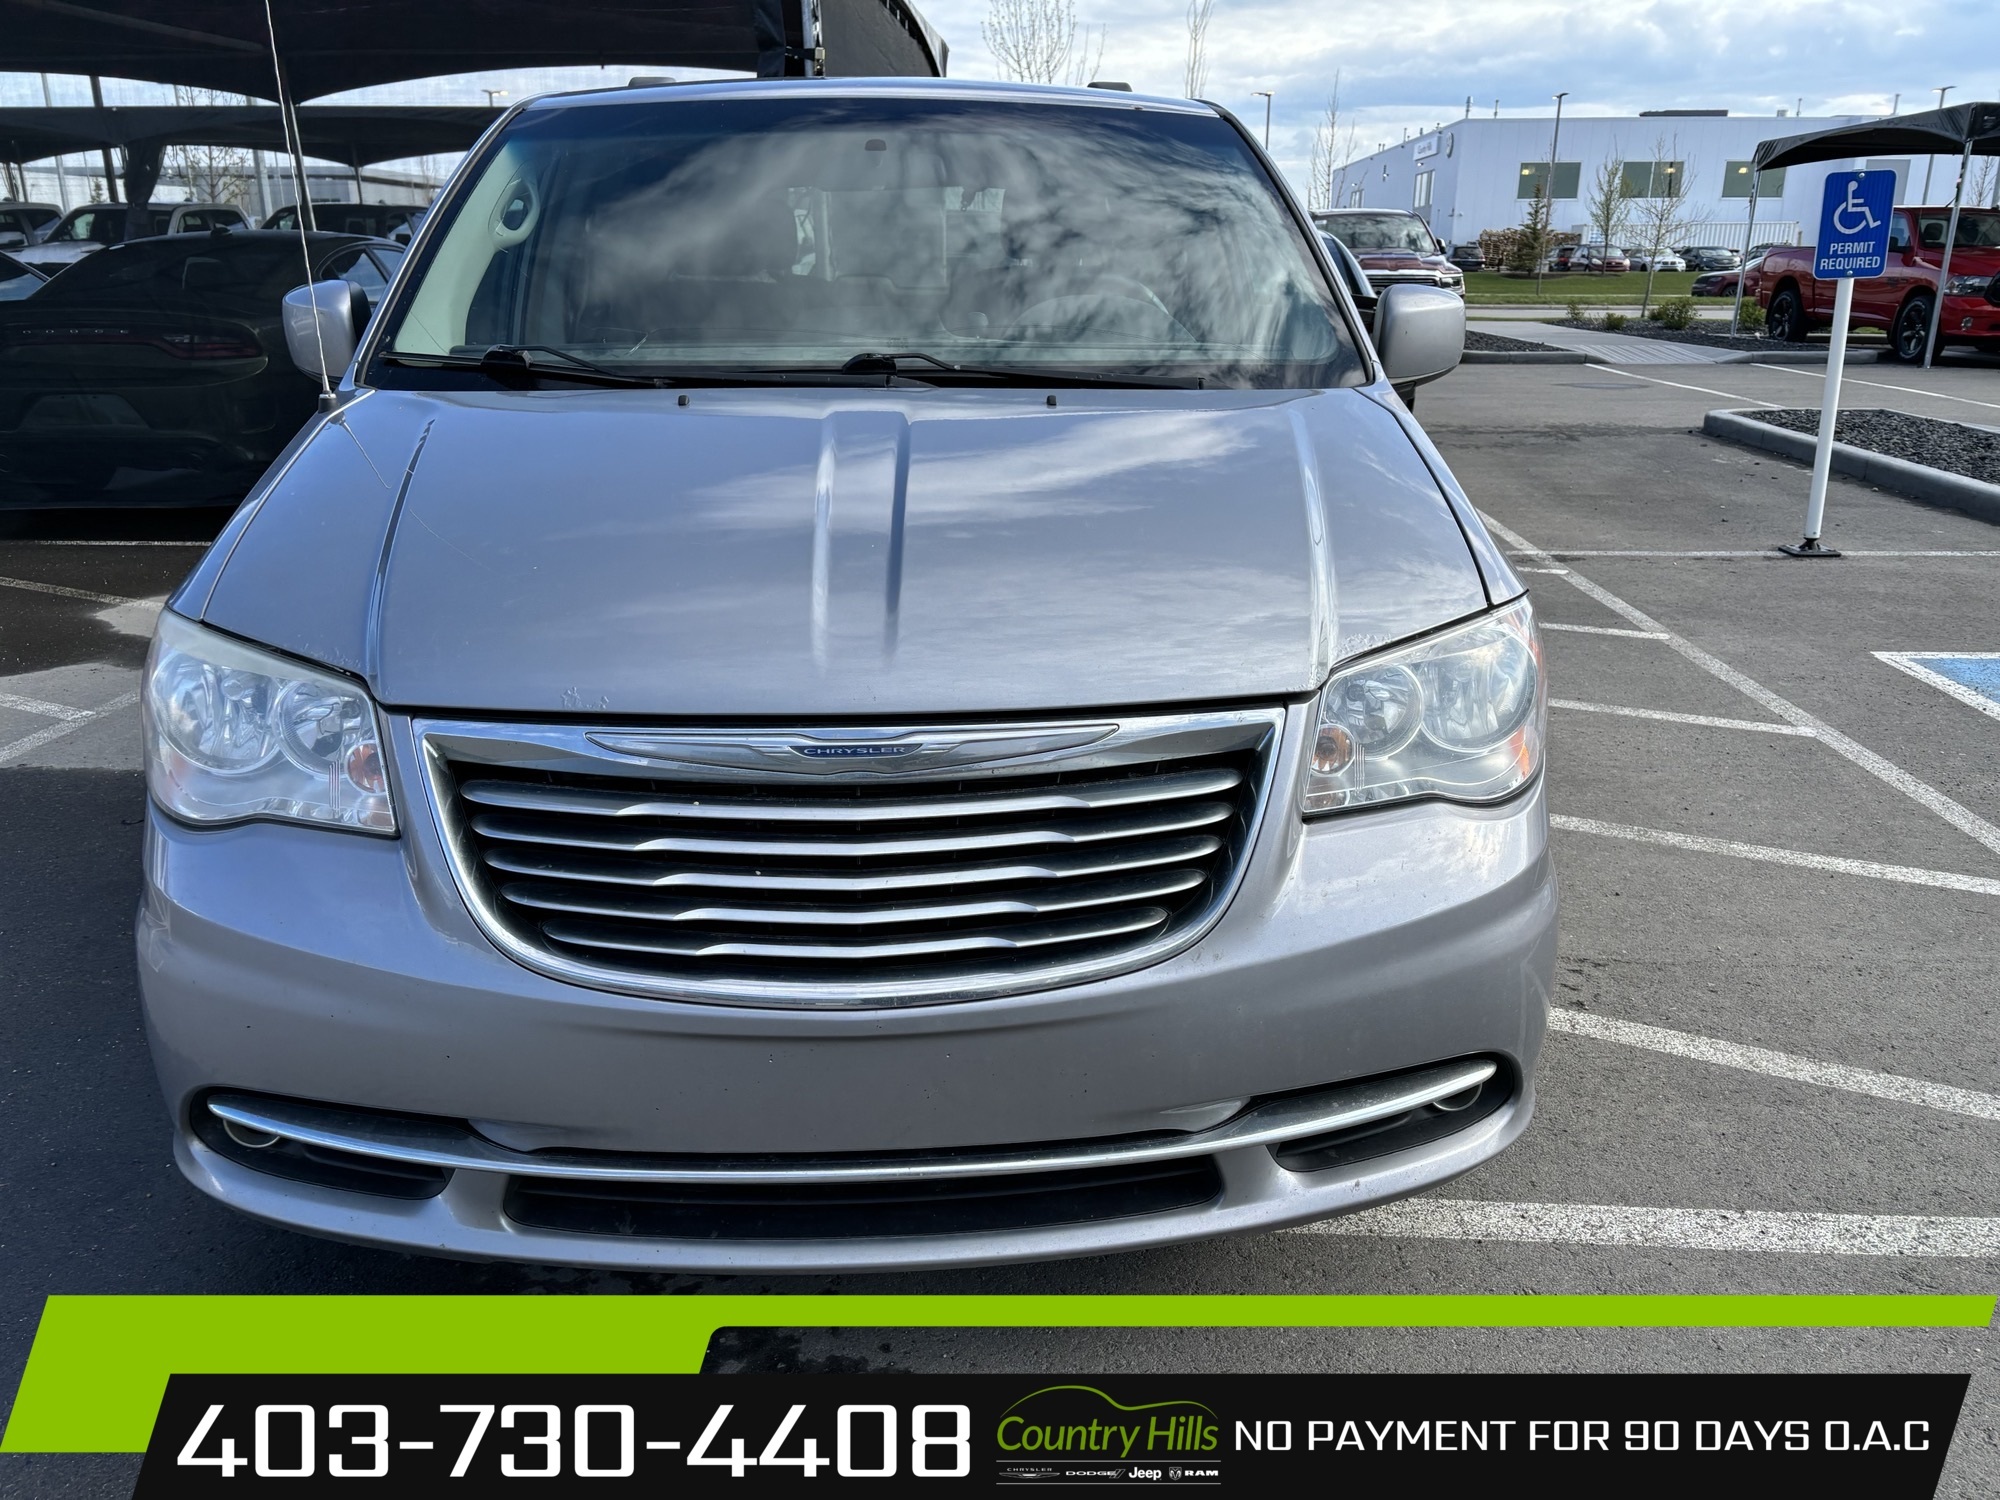 2014 Chrysler Town & Country 4dr Wgn Touring